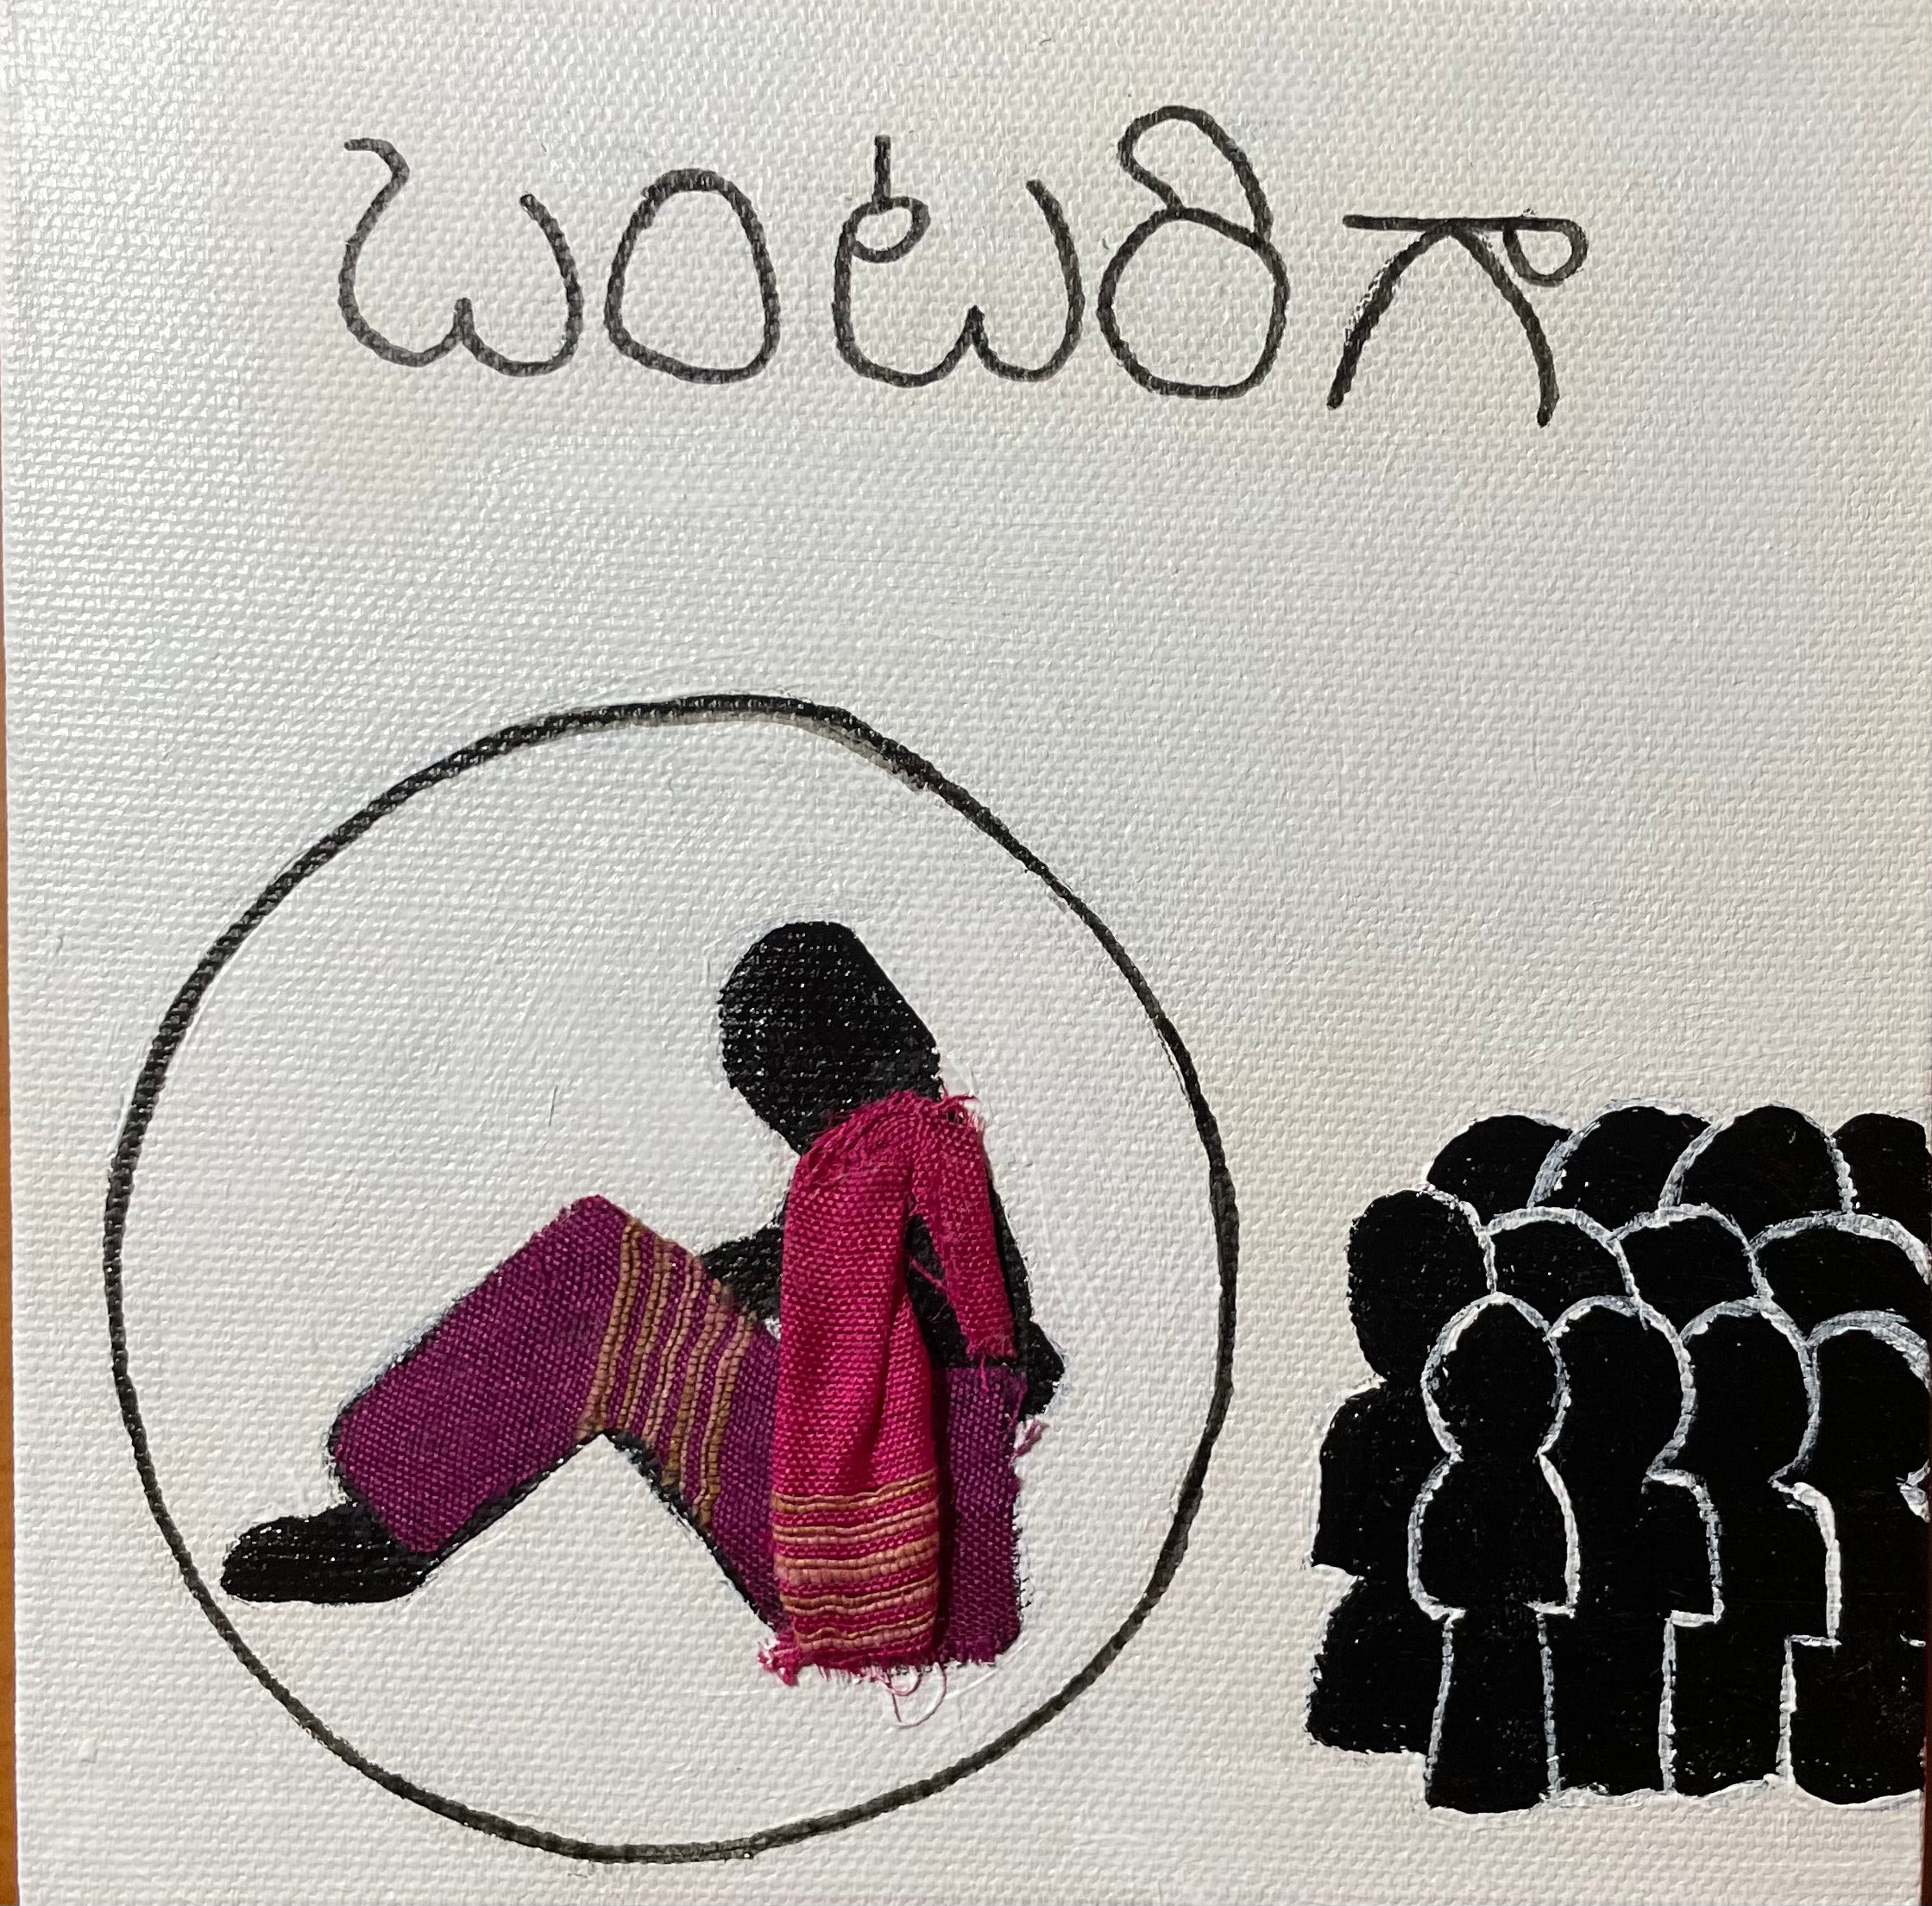 Visual representation of an Indian woman trapped in a circle, while the silhouettes of a large group of people are standing next to her (maybe staring at her and judging her). Her clothing is made of actual fabric. On top of the image, there is a caption in Telugu